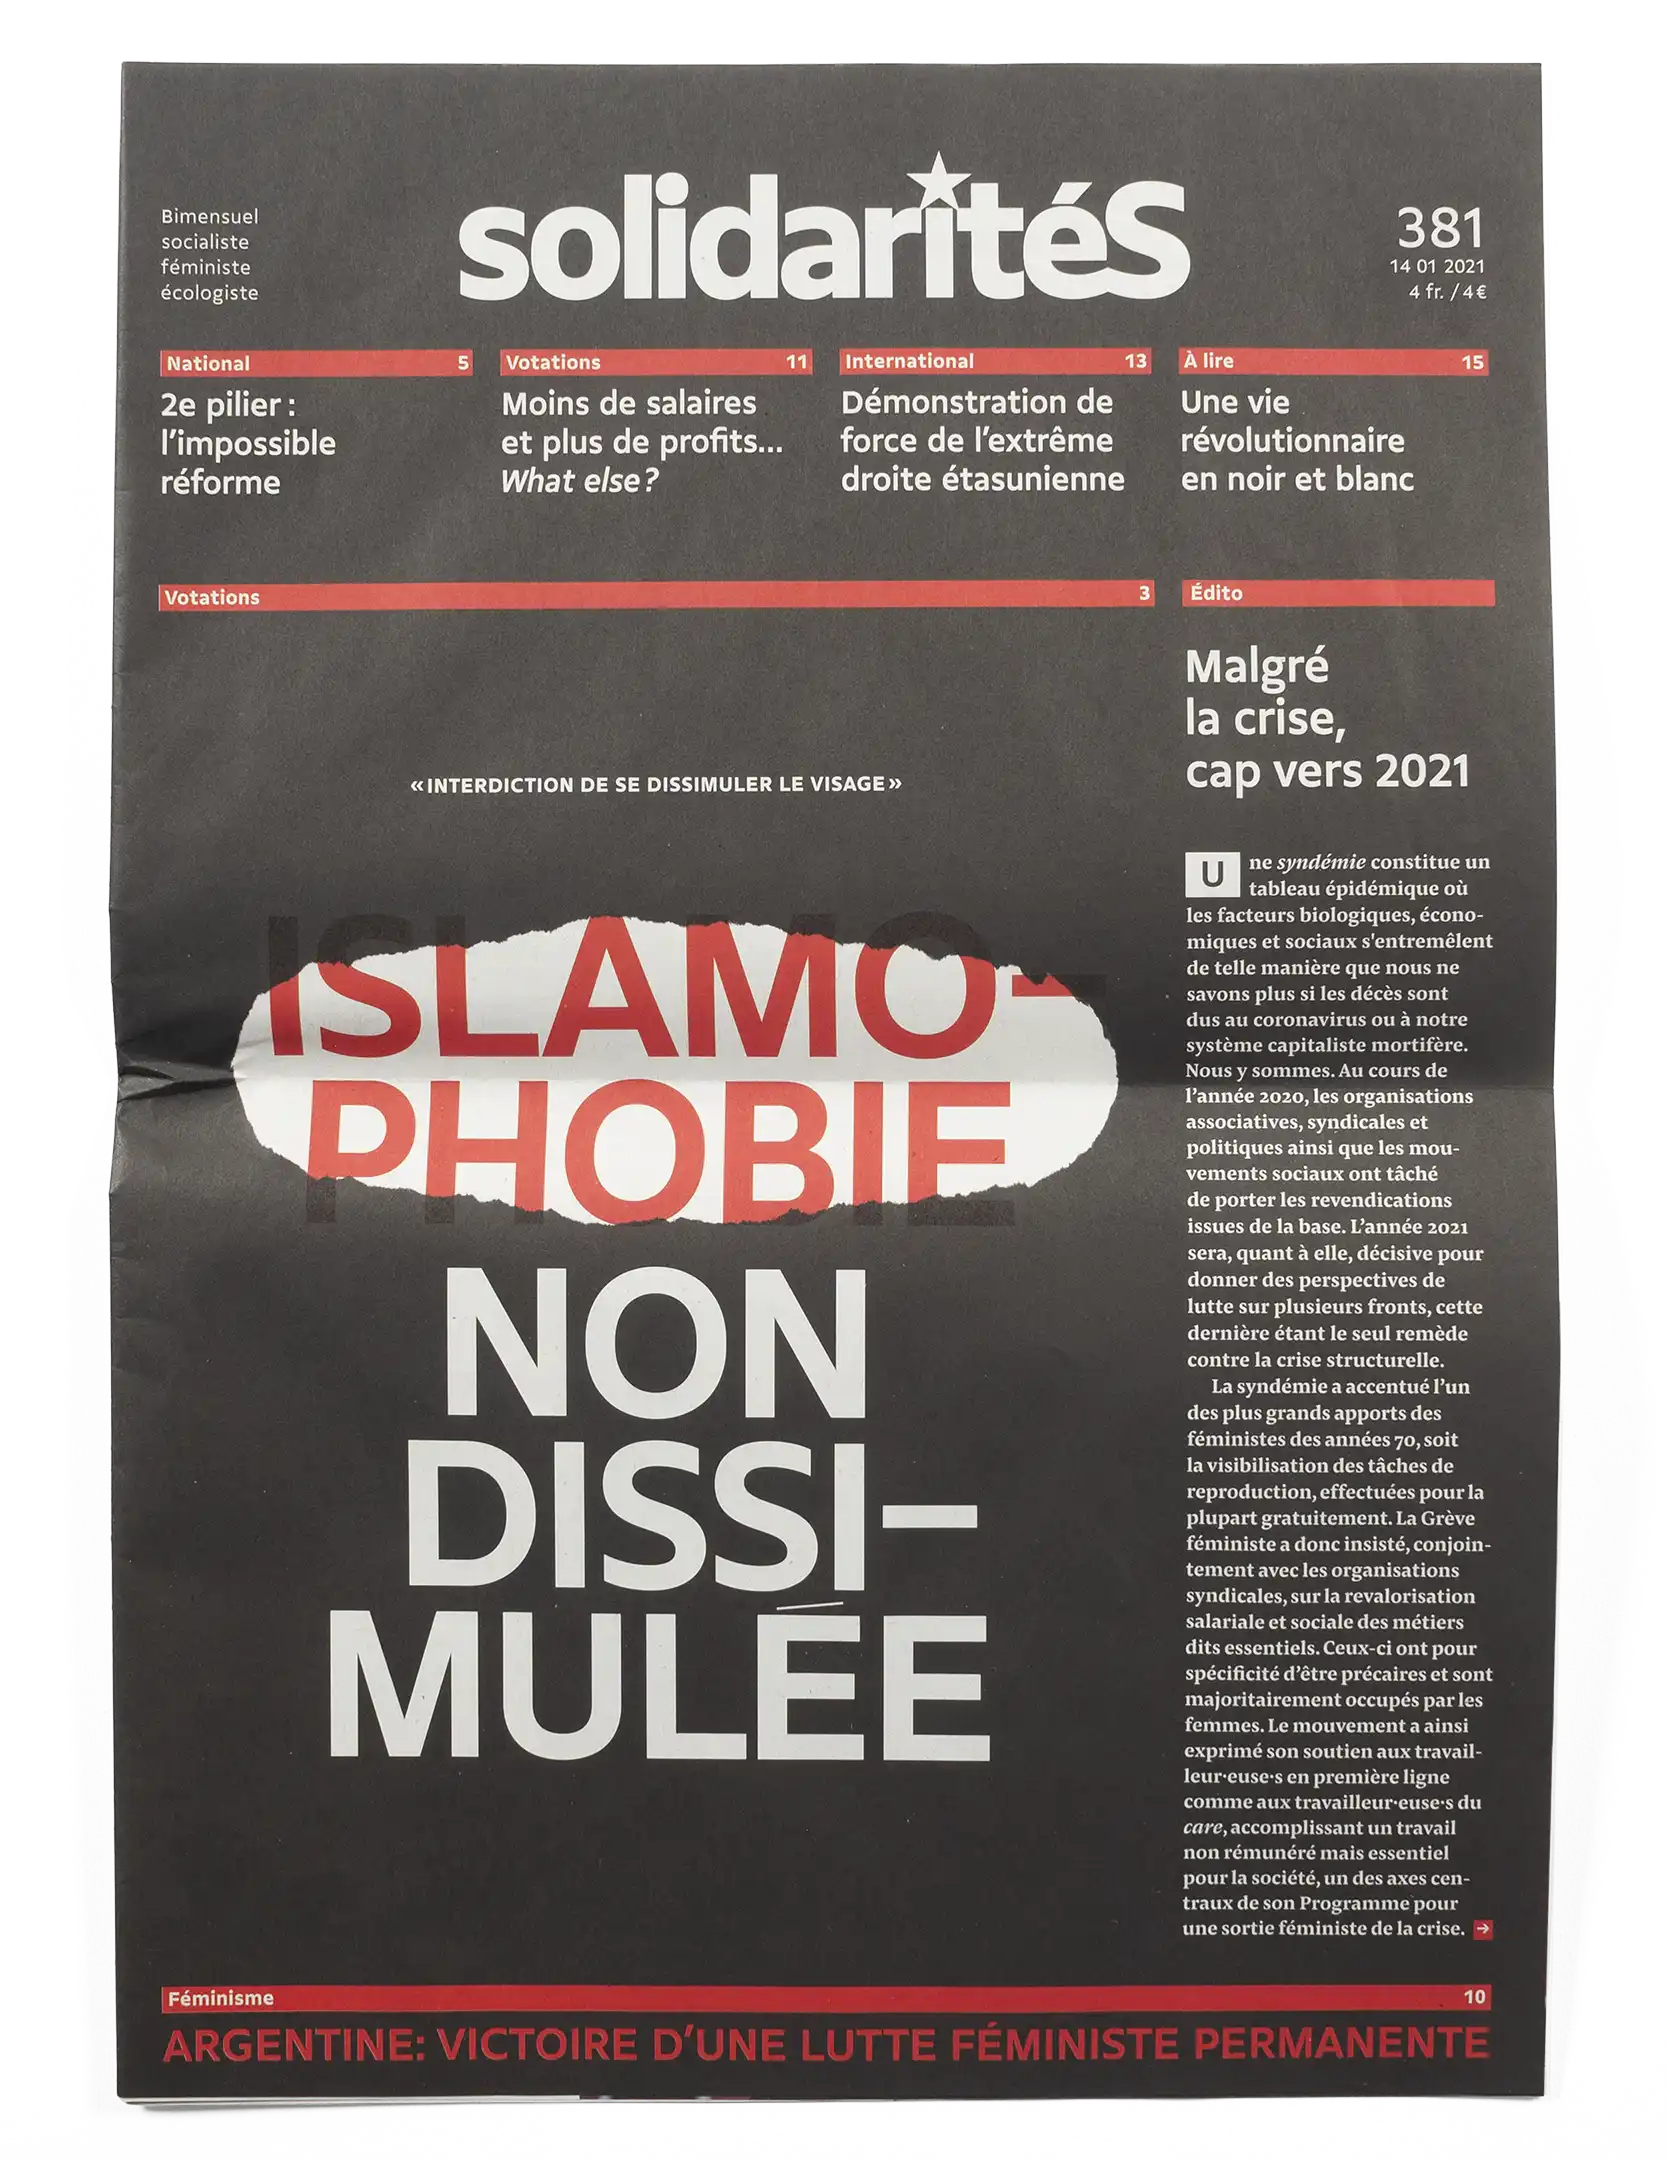 Cover of solidaritéS bimonthly about an anti-hijab initiative